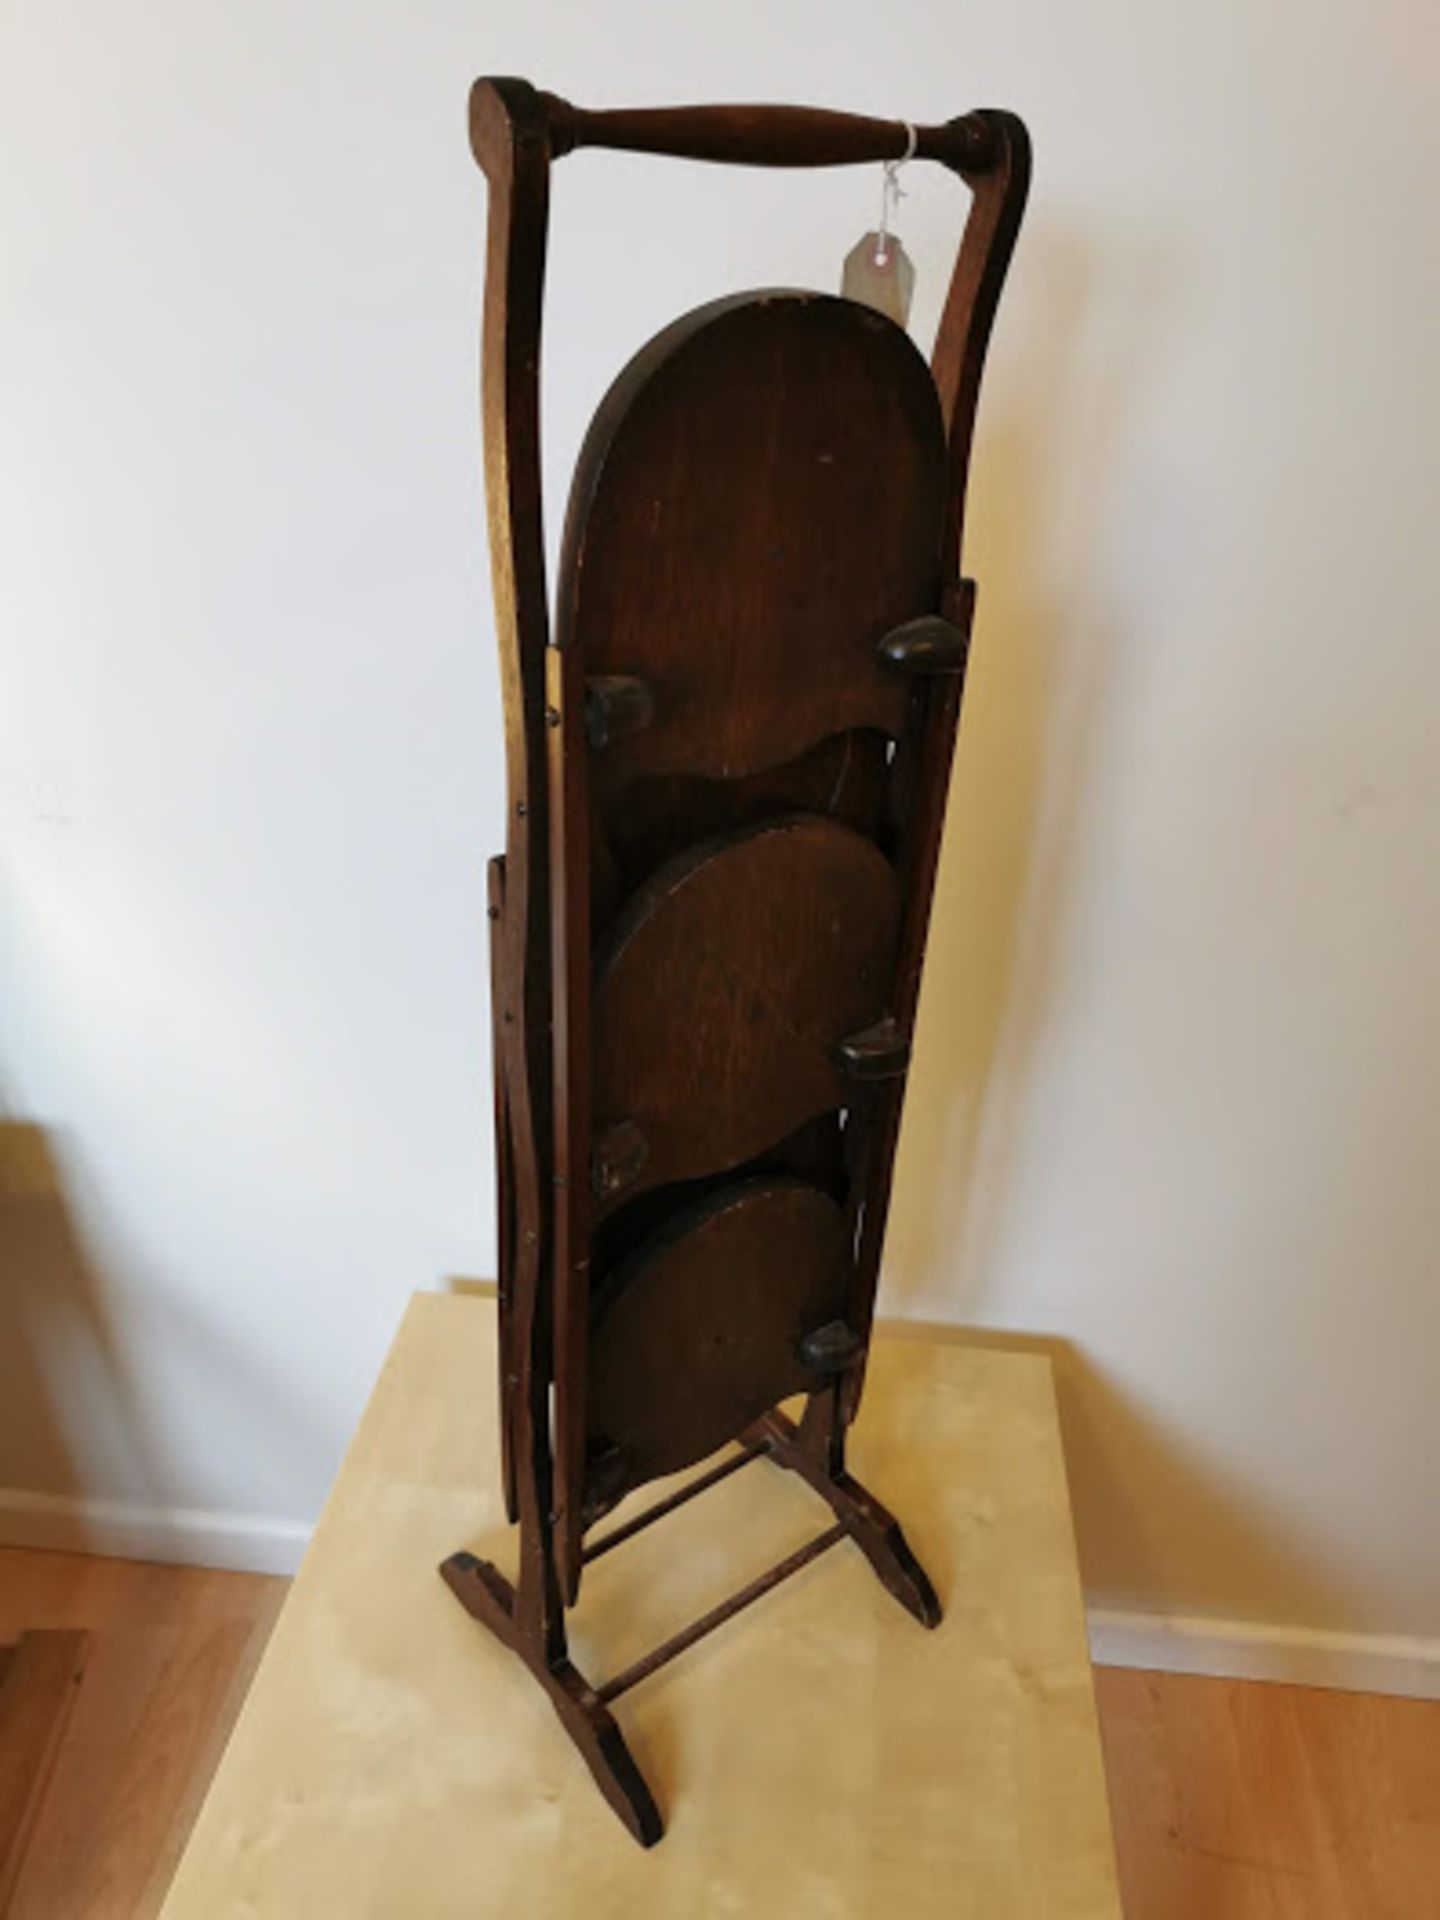 Antique Two-Sided Folding Cake Stand 4 Tier - Victorian Mahogany Wooden Tea Room or Shop Display - Image 3 of 4